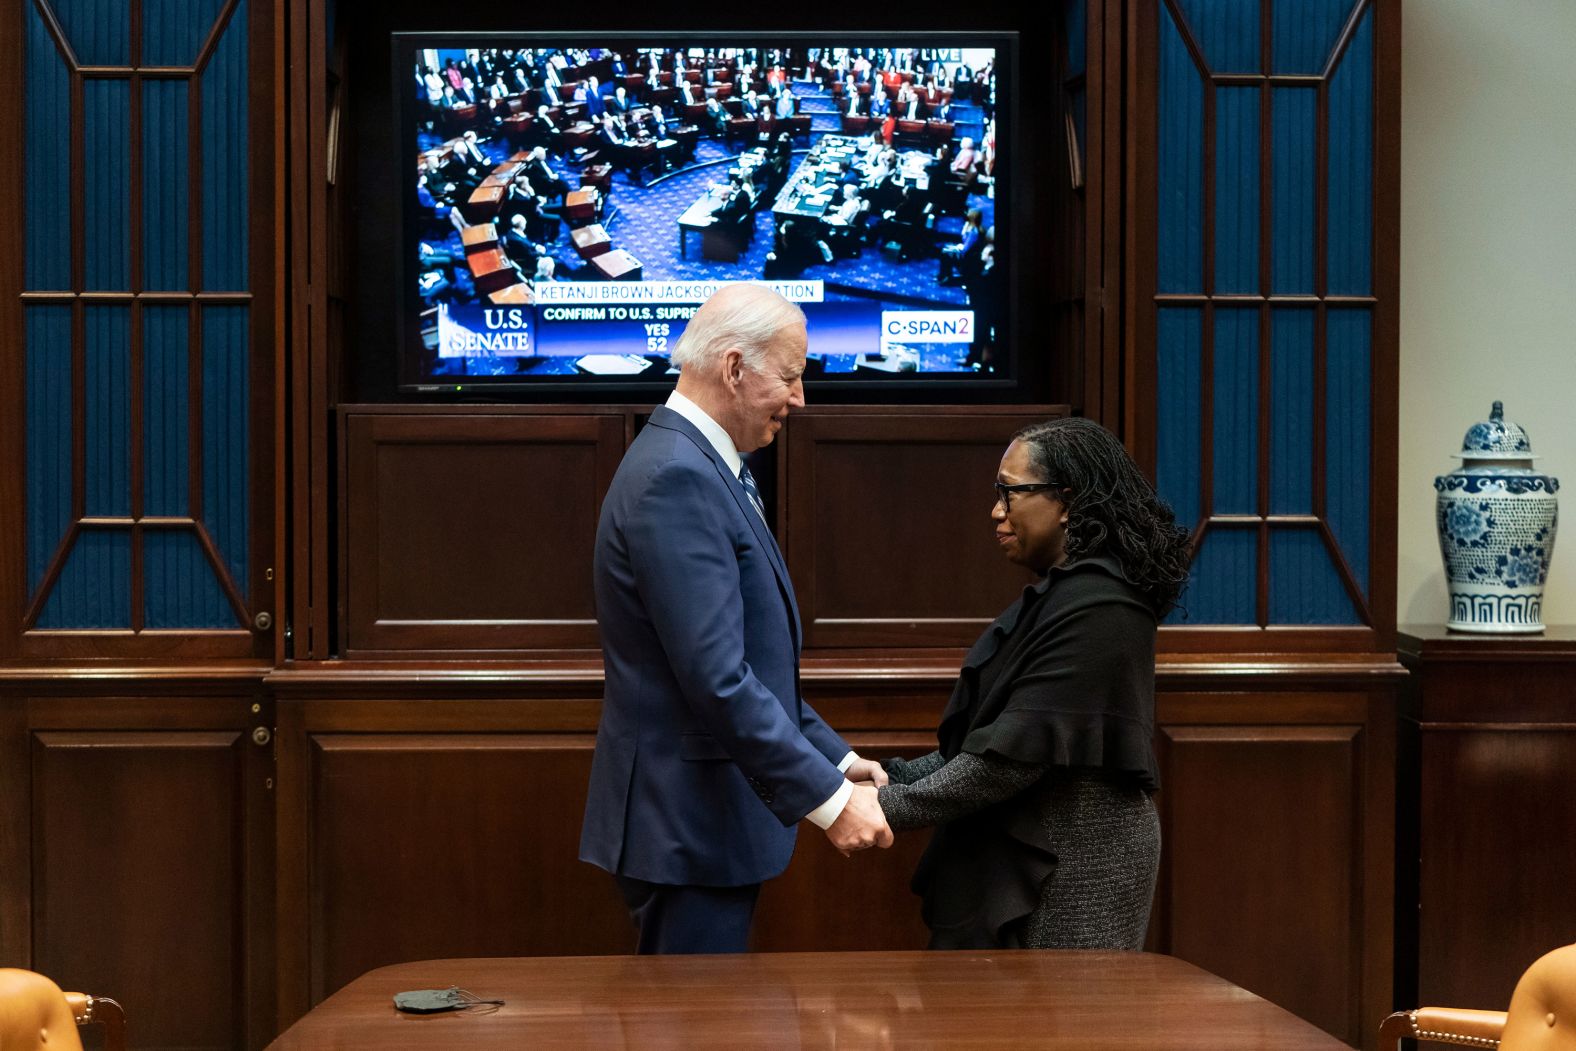 Biden holds hands with <a href="https://www.cnn.com/2022/02/25/politics/gallery/ketanji-brown-jackson/index.html" target="_blank">Ketanji Brown Jackson</a> as the Senate votes on her nomination to the US Supreme Court in April 2022. Jackson was confirmed and made history as <a href="https://www.cnn.com/2022/06/30/politics/who-is-justice-ketanji-brown-jackson/index.html" target="_blank">the first Black woman on the court</a>.